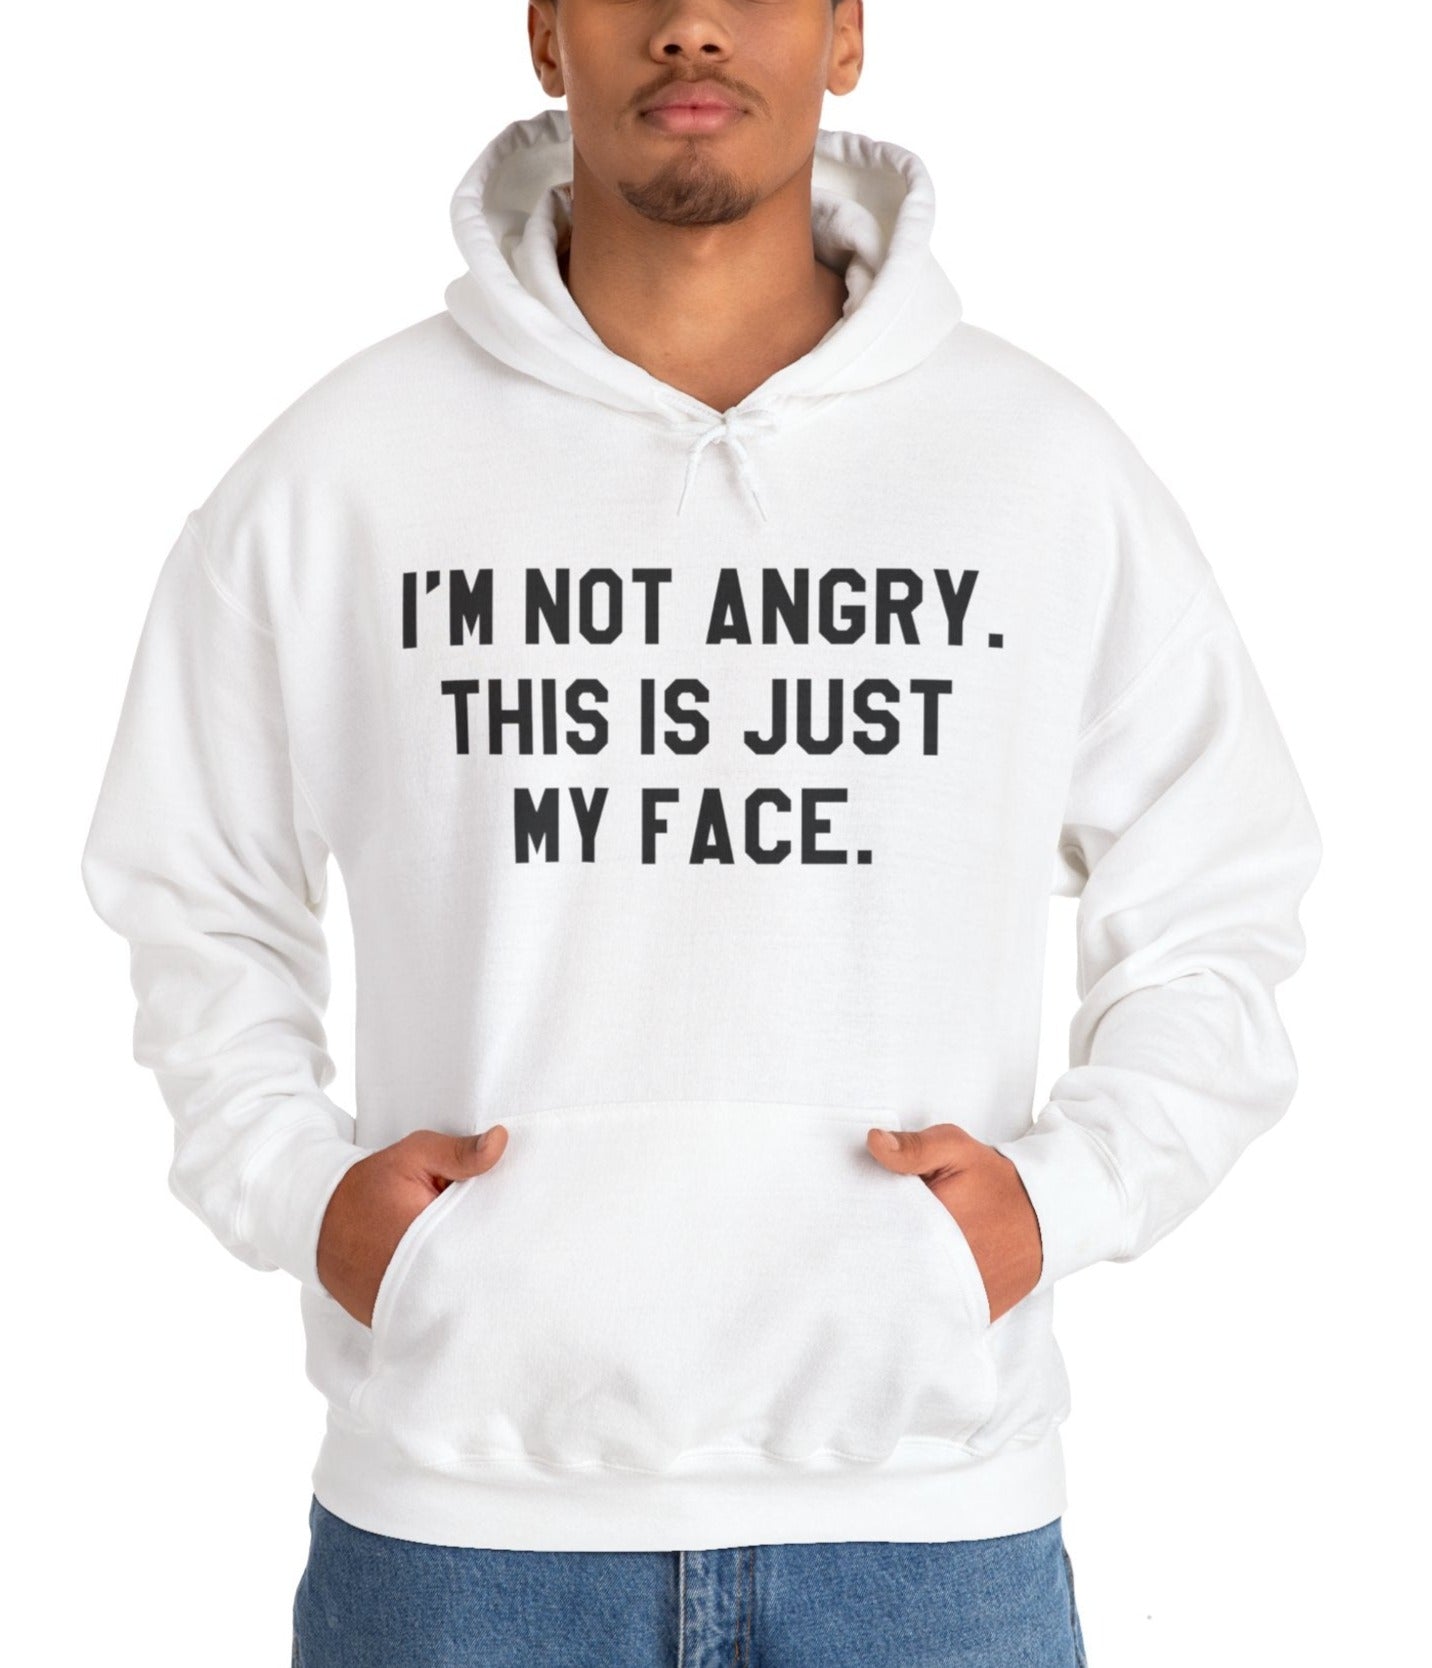 I'M Not Angry. This is Just my Face. Unisex Hoodie